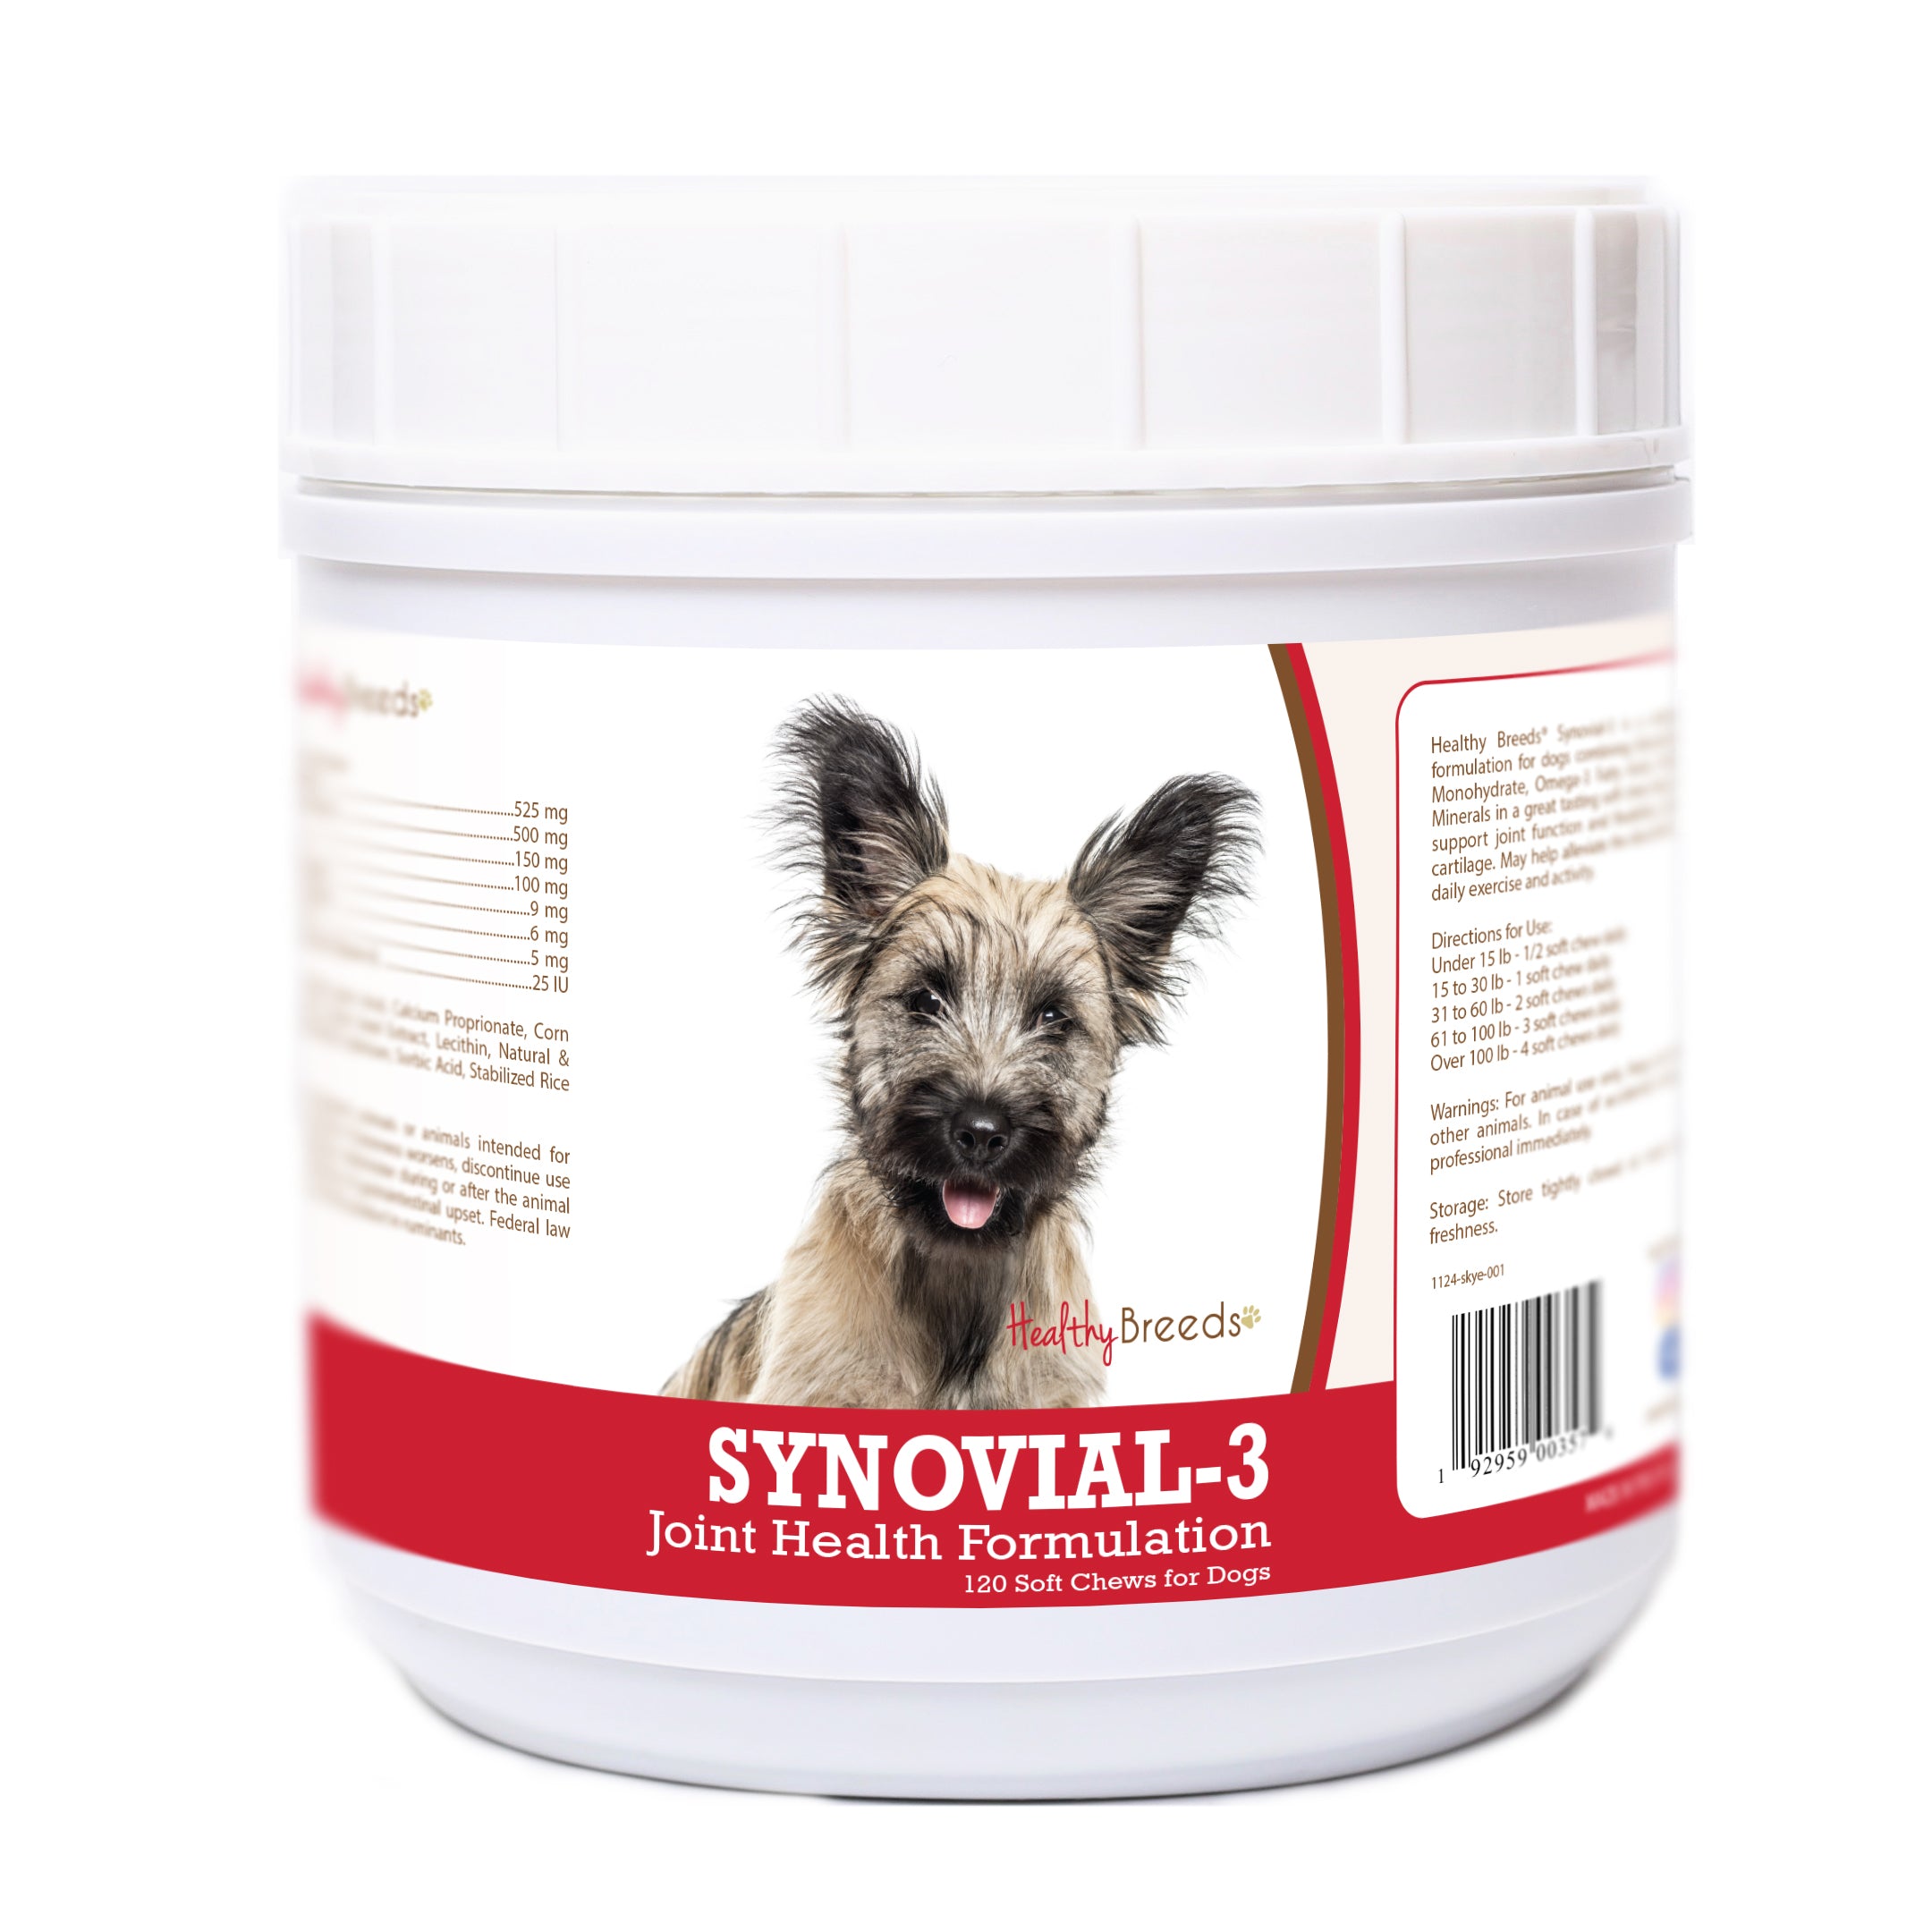 Skye Terrier Synovial-3 Joint Health Formulation Soft Chews 120 Count